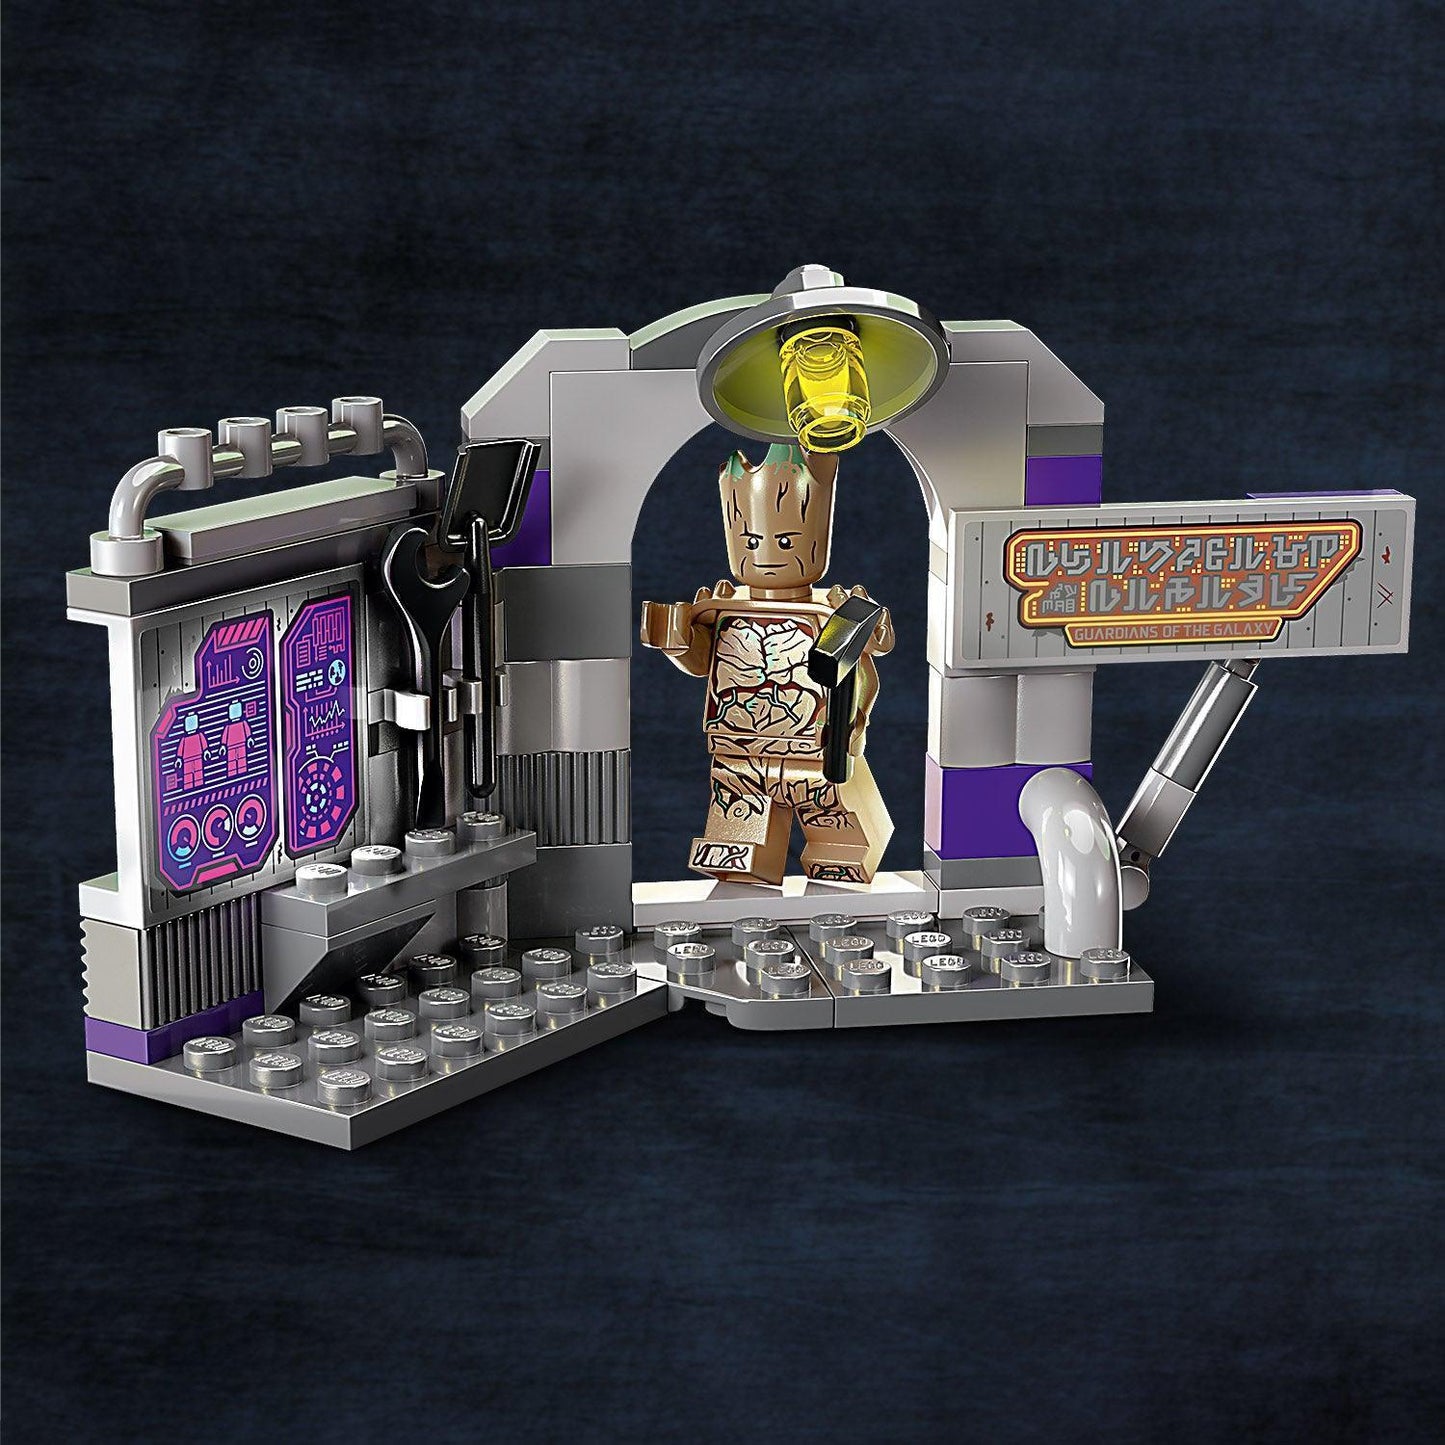 LEGO Guardians of the Galaxy Hoofdkwartier 76253 Superheroes | 2TTOYS ✓ Official shop<br>